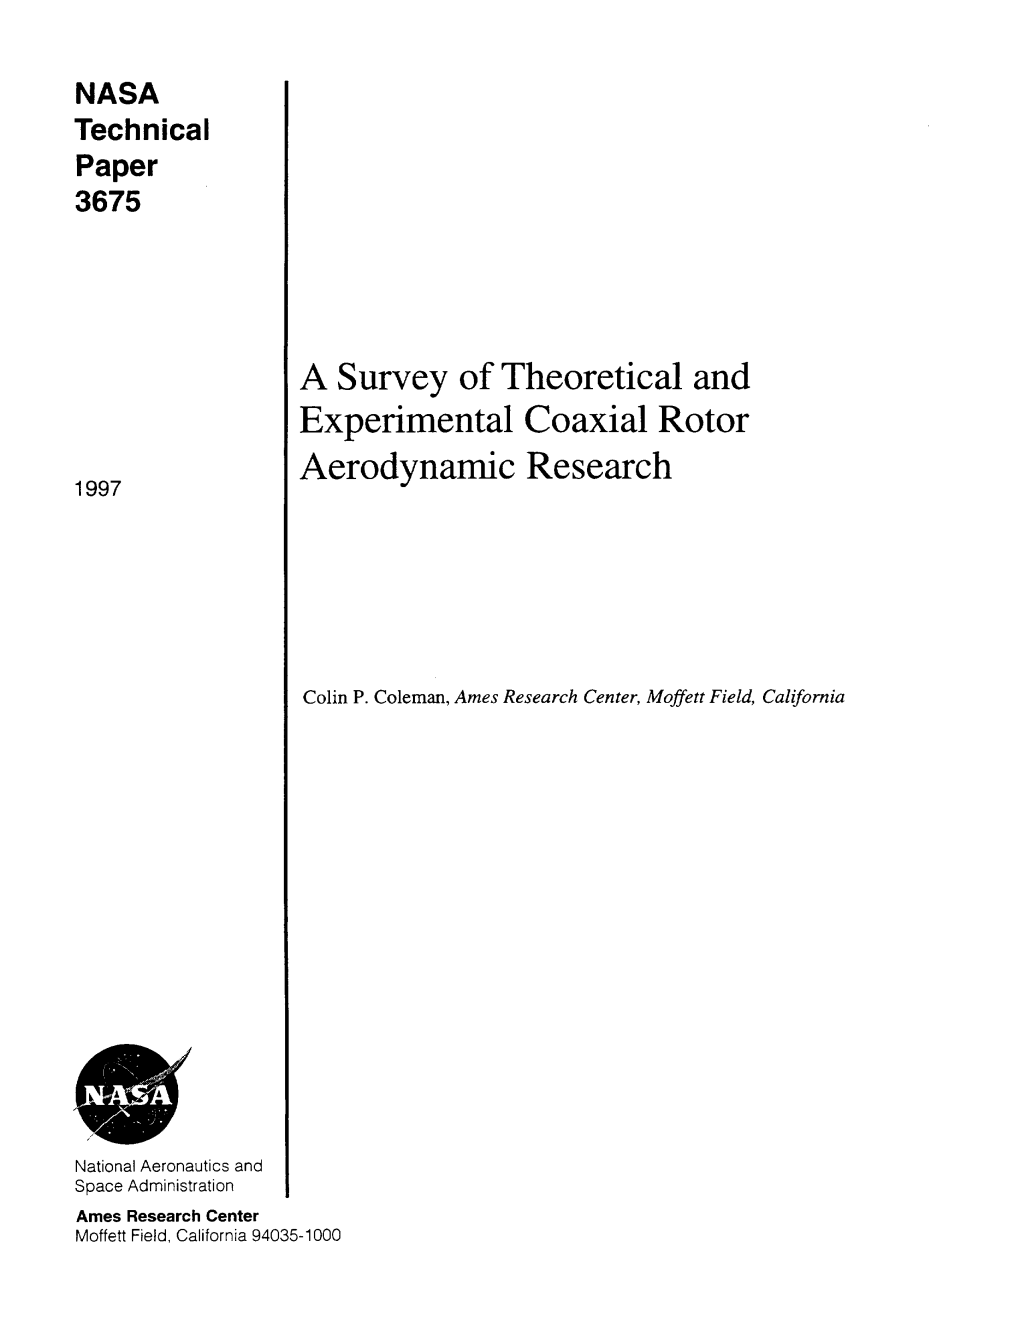 A Survey of Theoretical and Experimental Coaxial Rotor Aerodynamic Research 1997